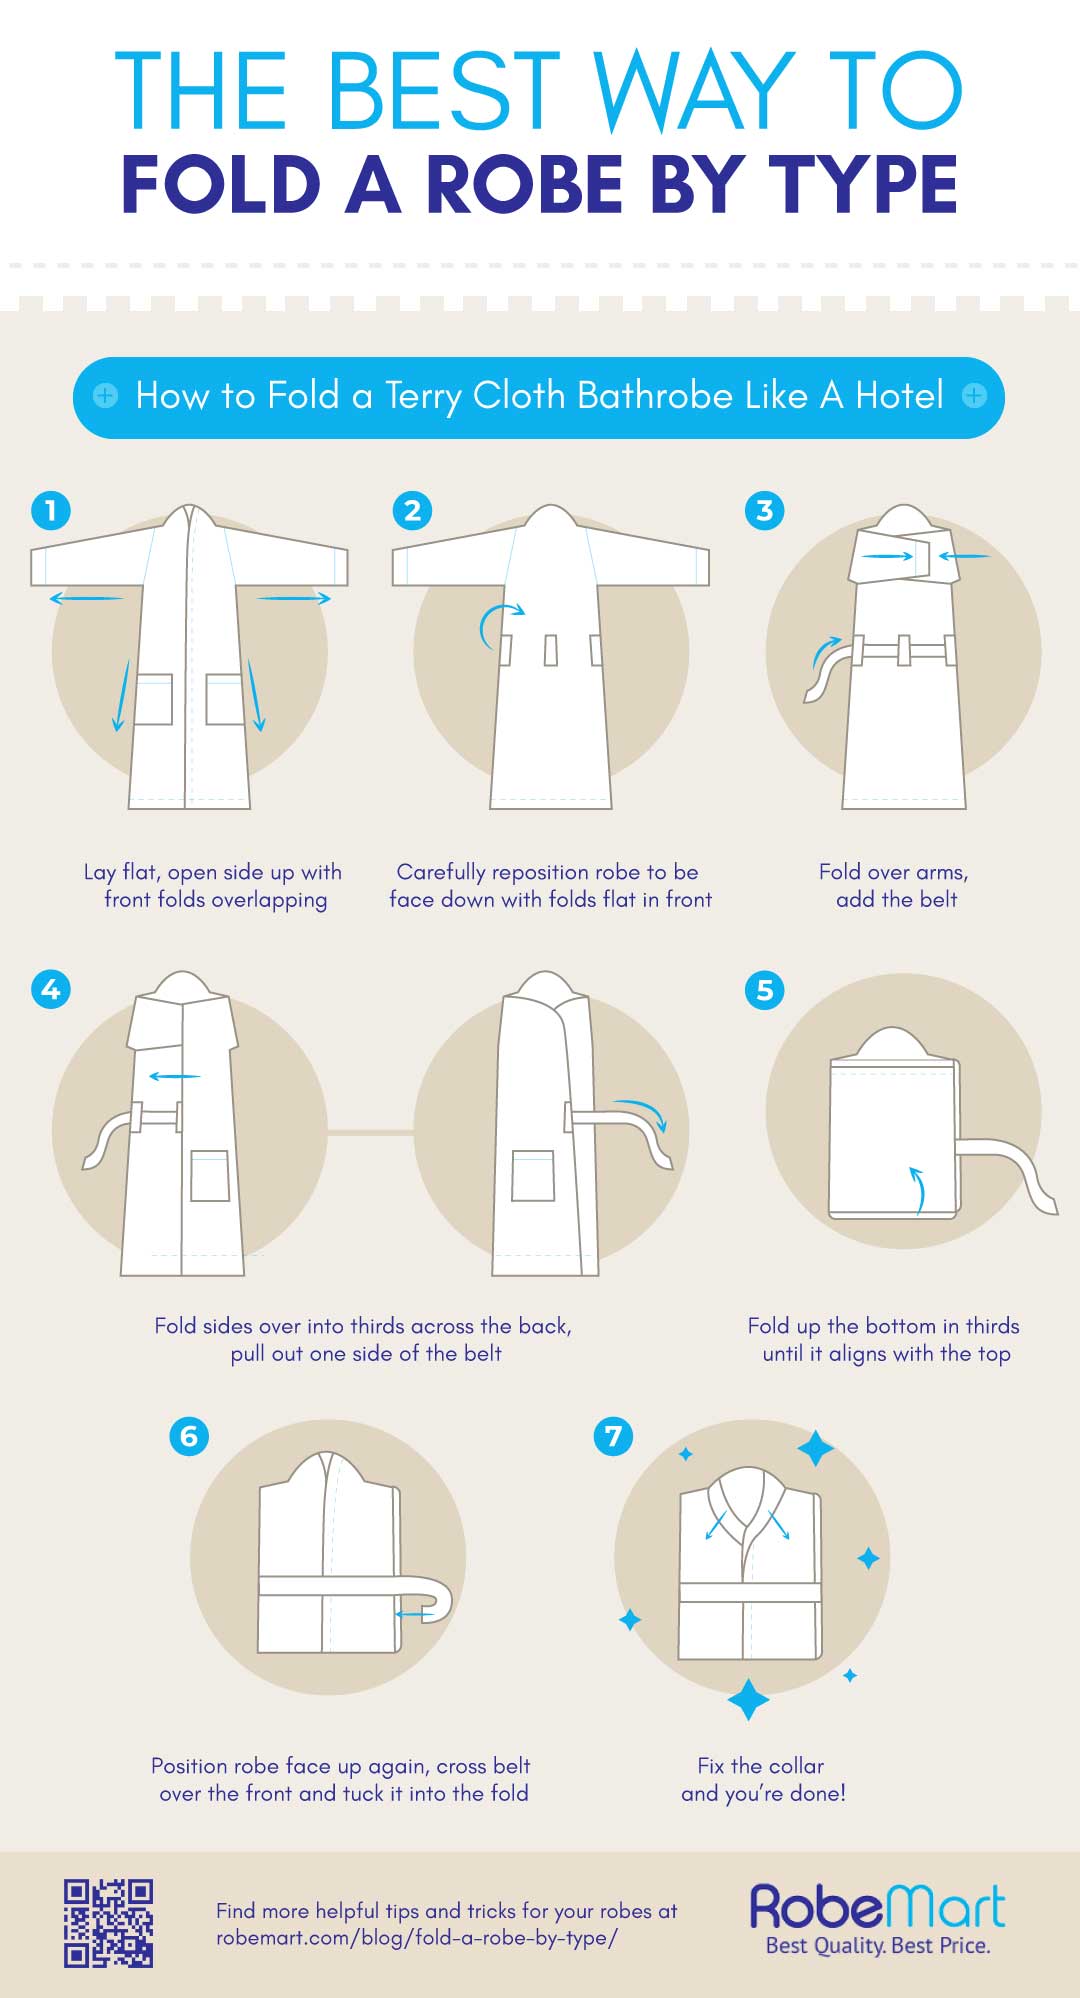 How to Fold a Terry Cloth Bathrobe Like A Hotel: 1. Lay flat, open side up with front folds overlapping. 2. Carefully reposition robe to be face down with folds flat in front. 3. Fold over arms, add the belt. 4. Fold sides over into thirds across the back, pull out one side of the belt. 5. Fold up the bottom in thirds until it aligns with the top. 6. Position robe face up again, cross belt over the front and tuck it into the fold. 7. Fix the collar and you’re done! | https://robemart.com/blog/fold-a-robe-by-type/